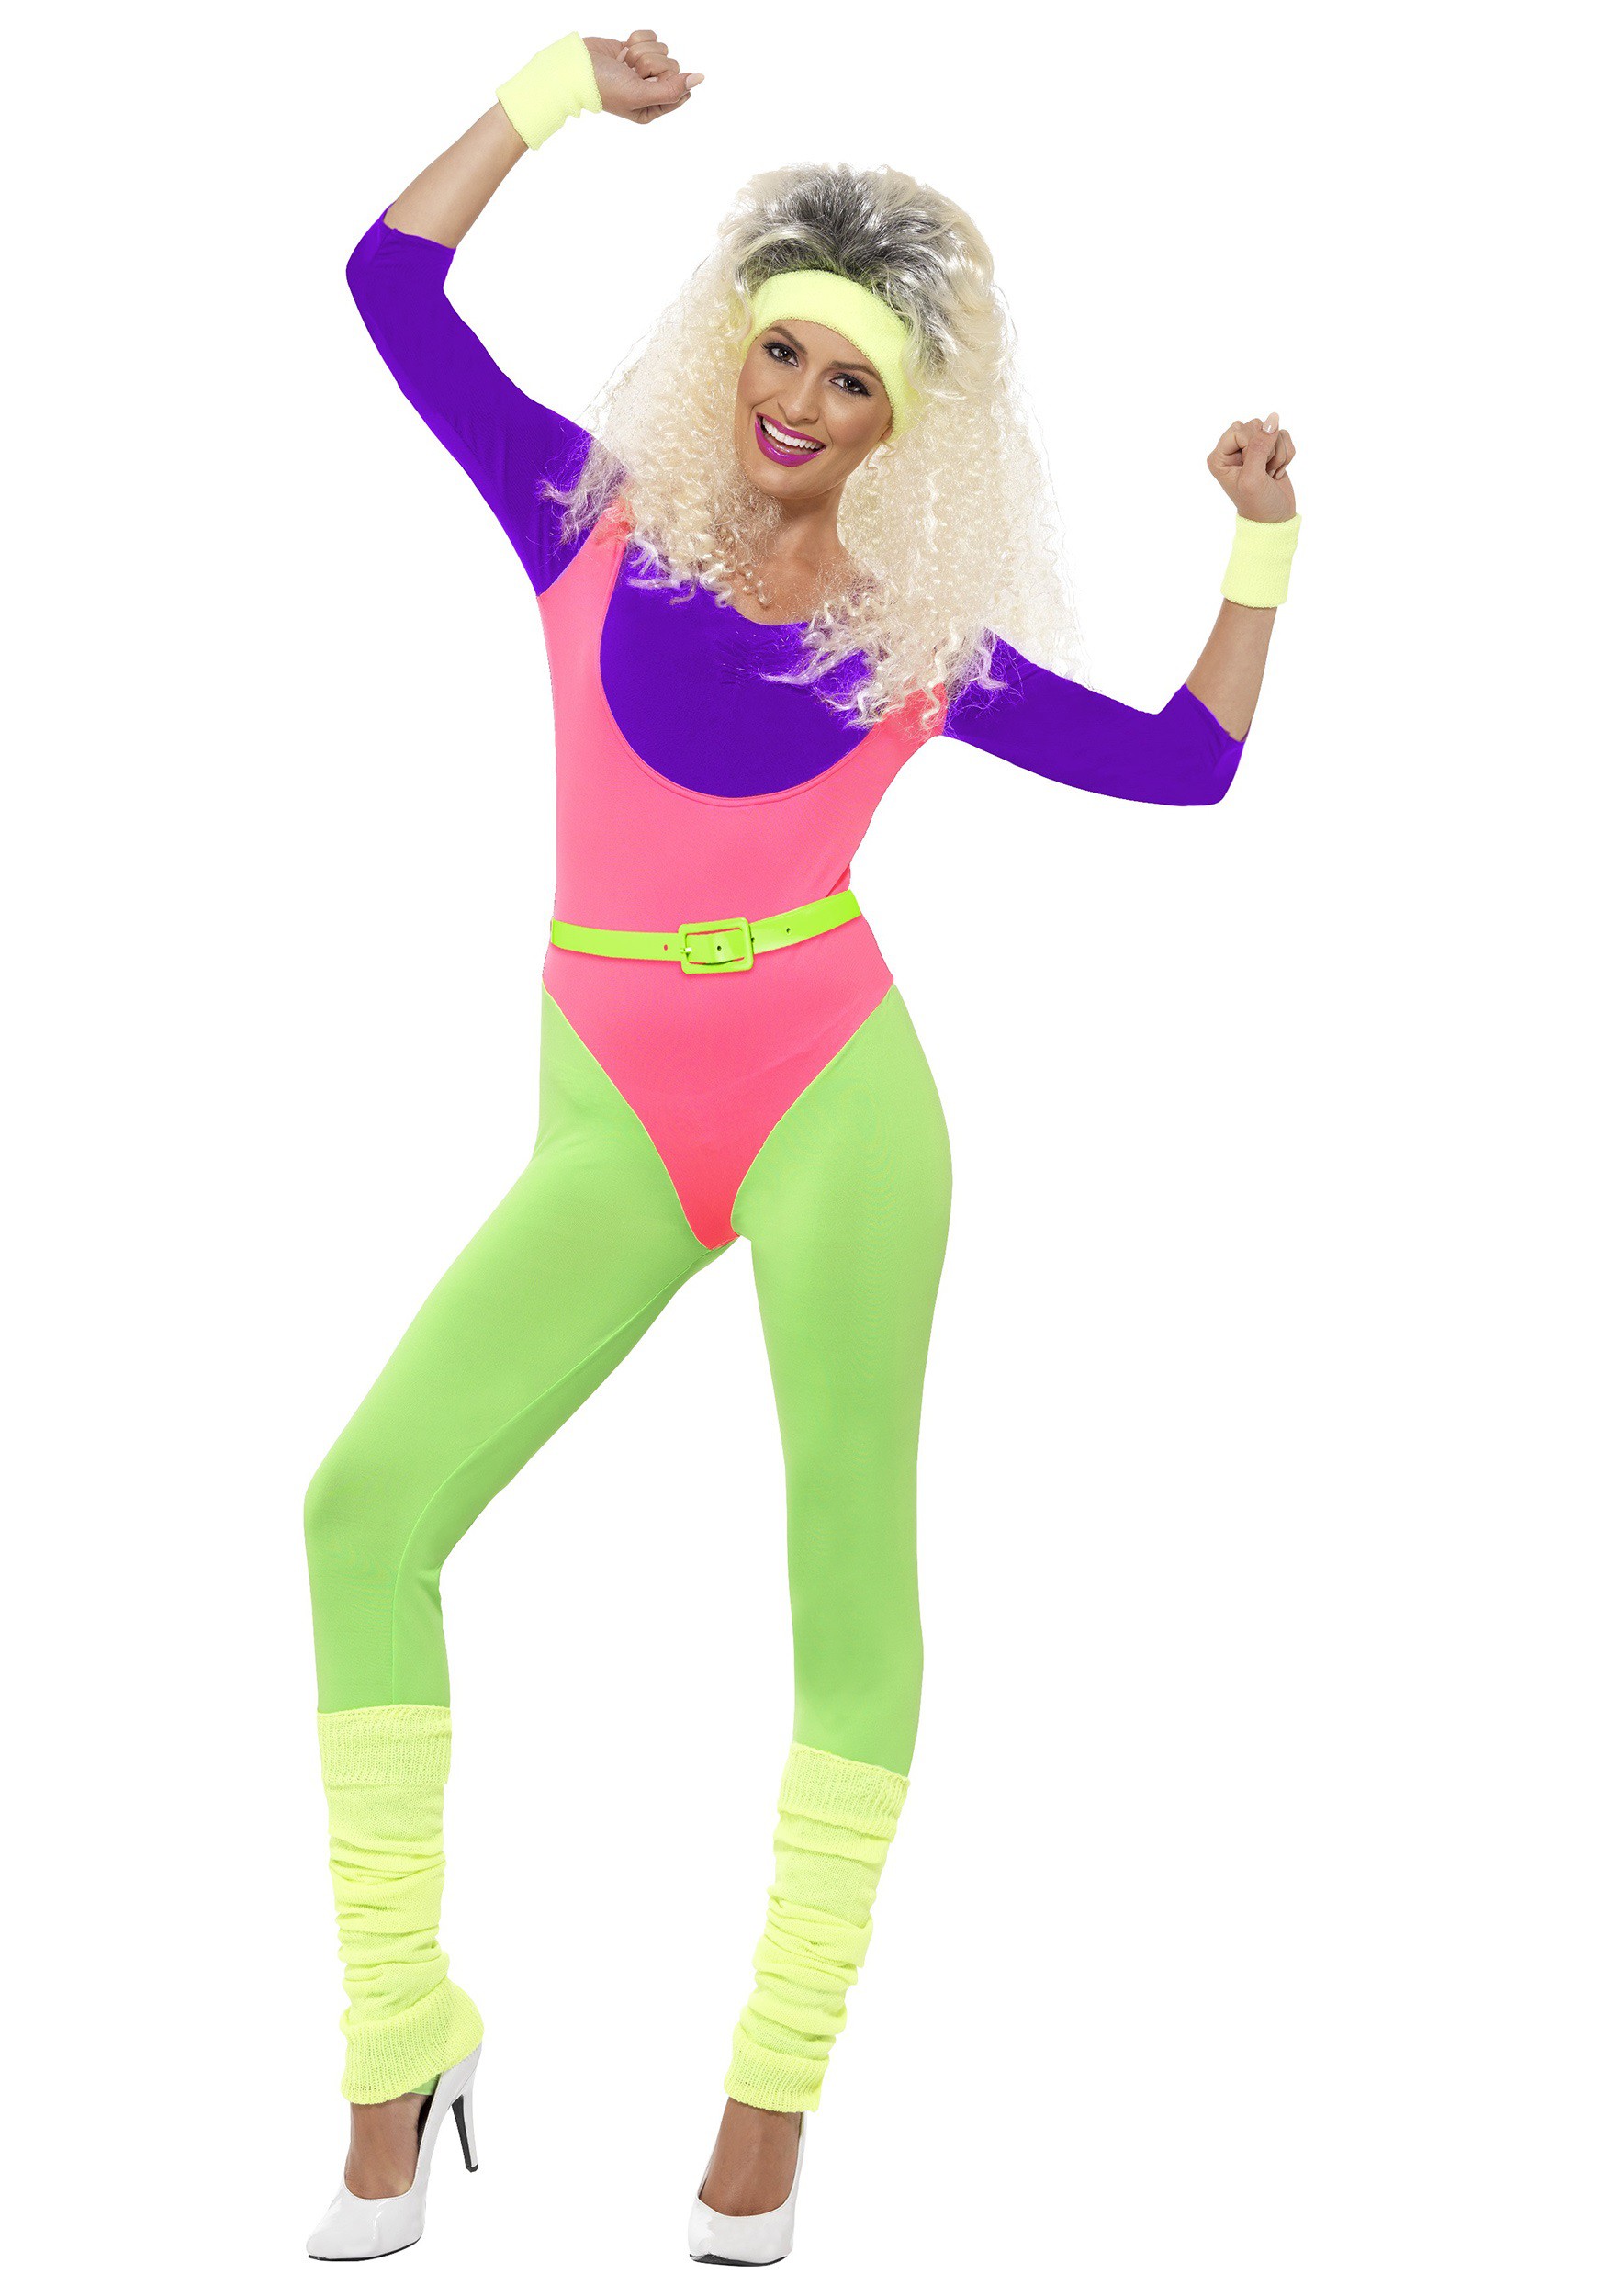 https://images.halloweencostumes.ca/products/31383/1-1/womens-80s-workout-costume.jpg